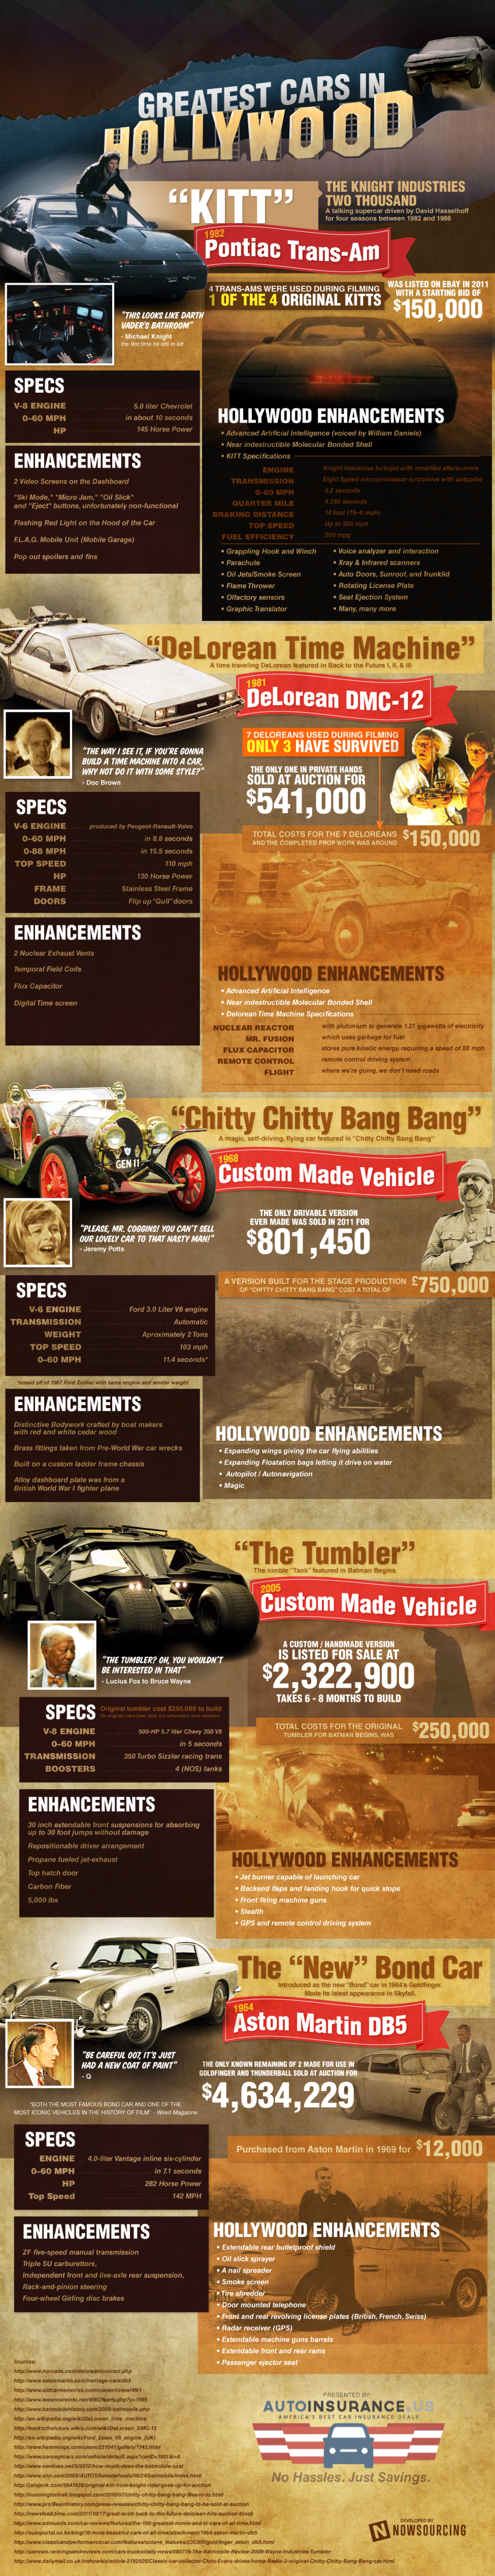 Greatest Cars In Hollywood Infographic